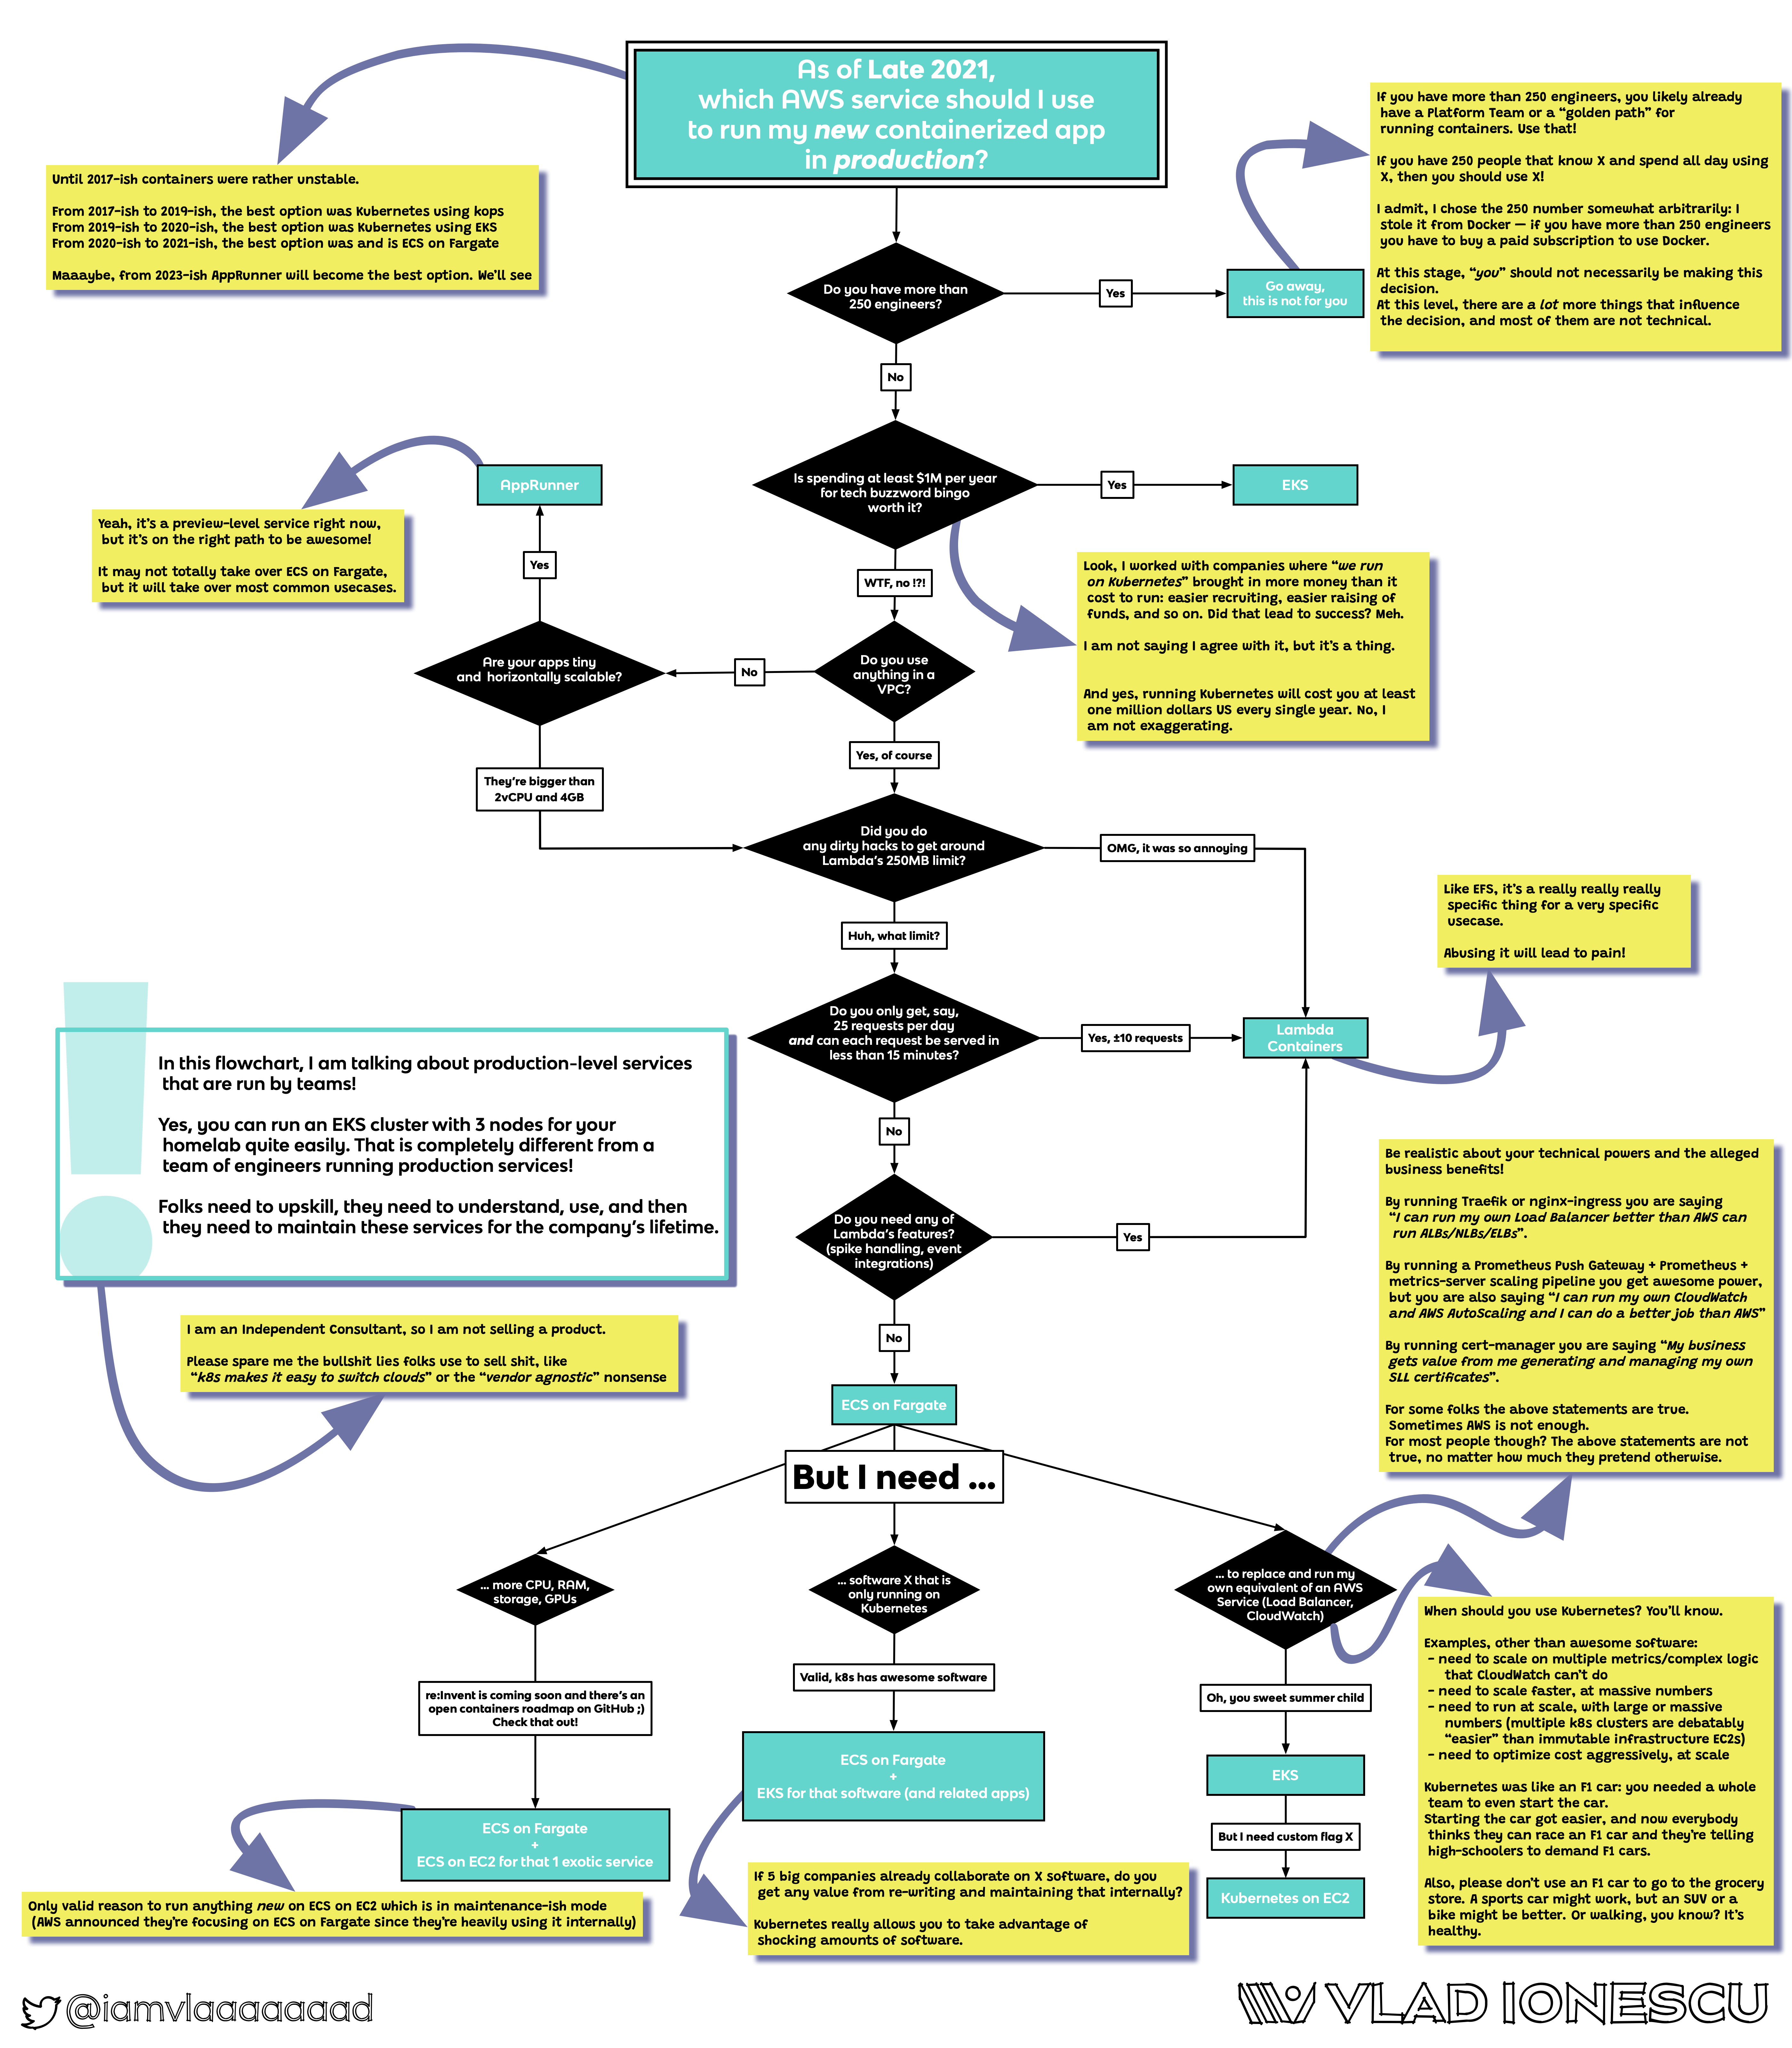 The flowchart, with comments